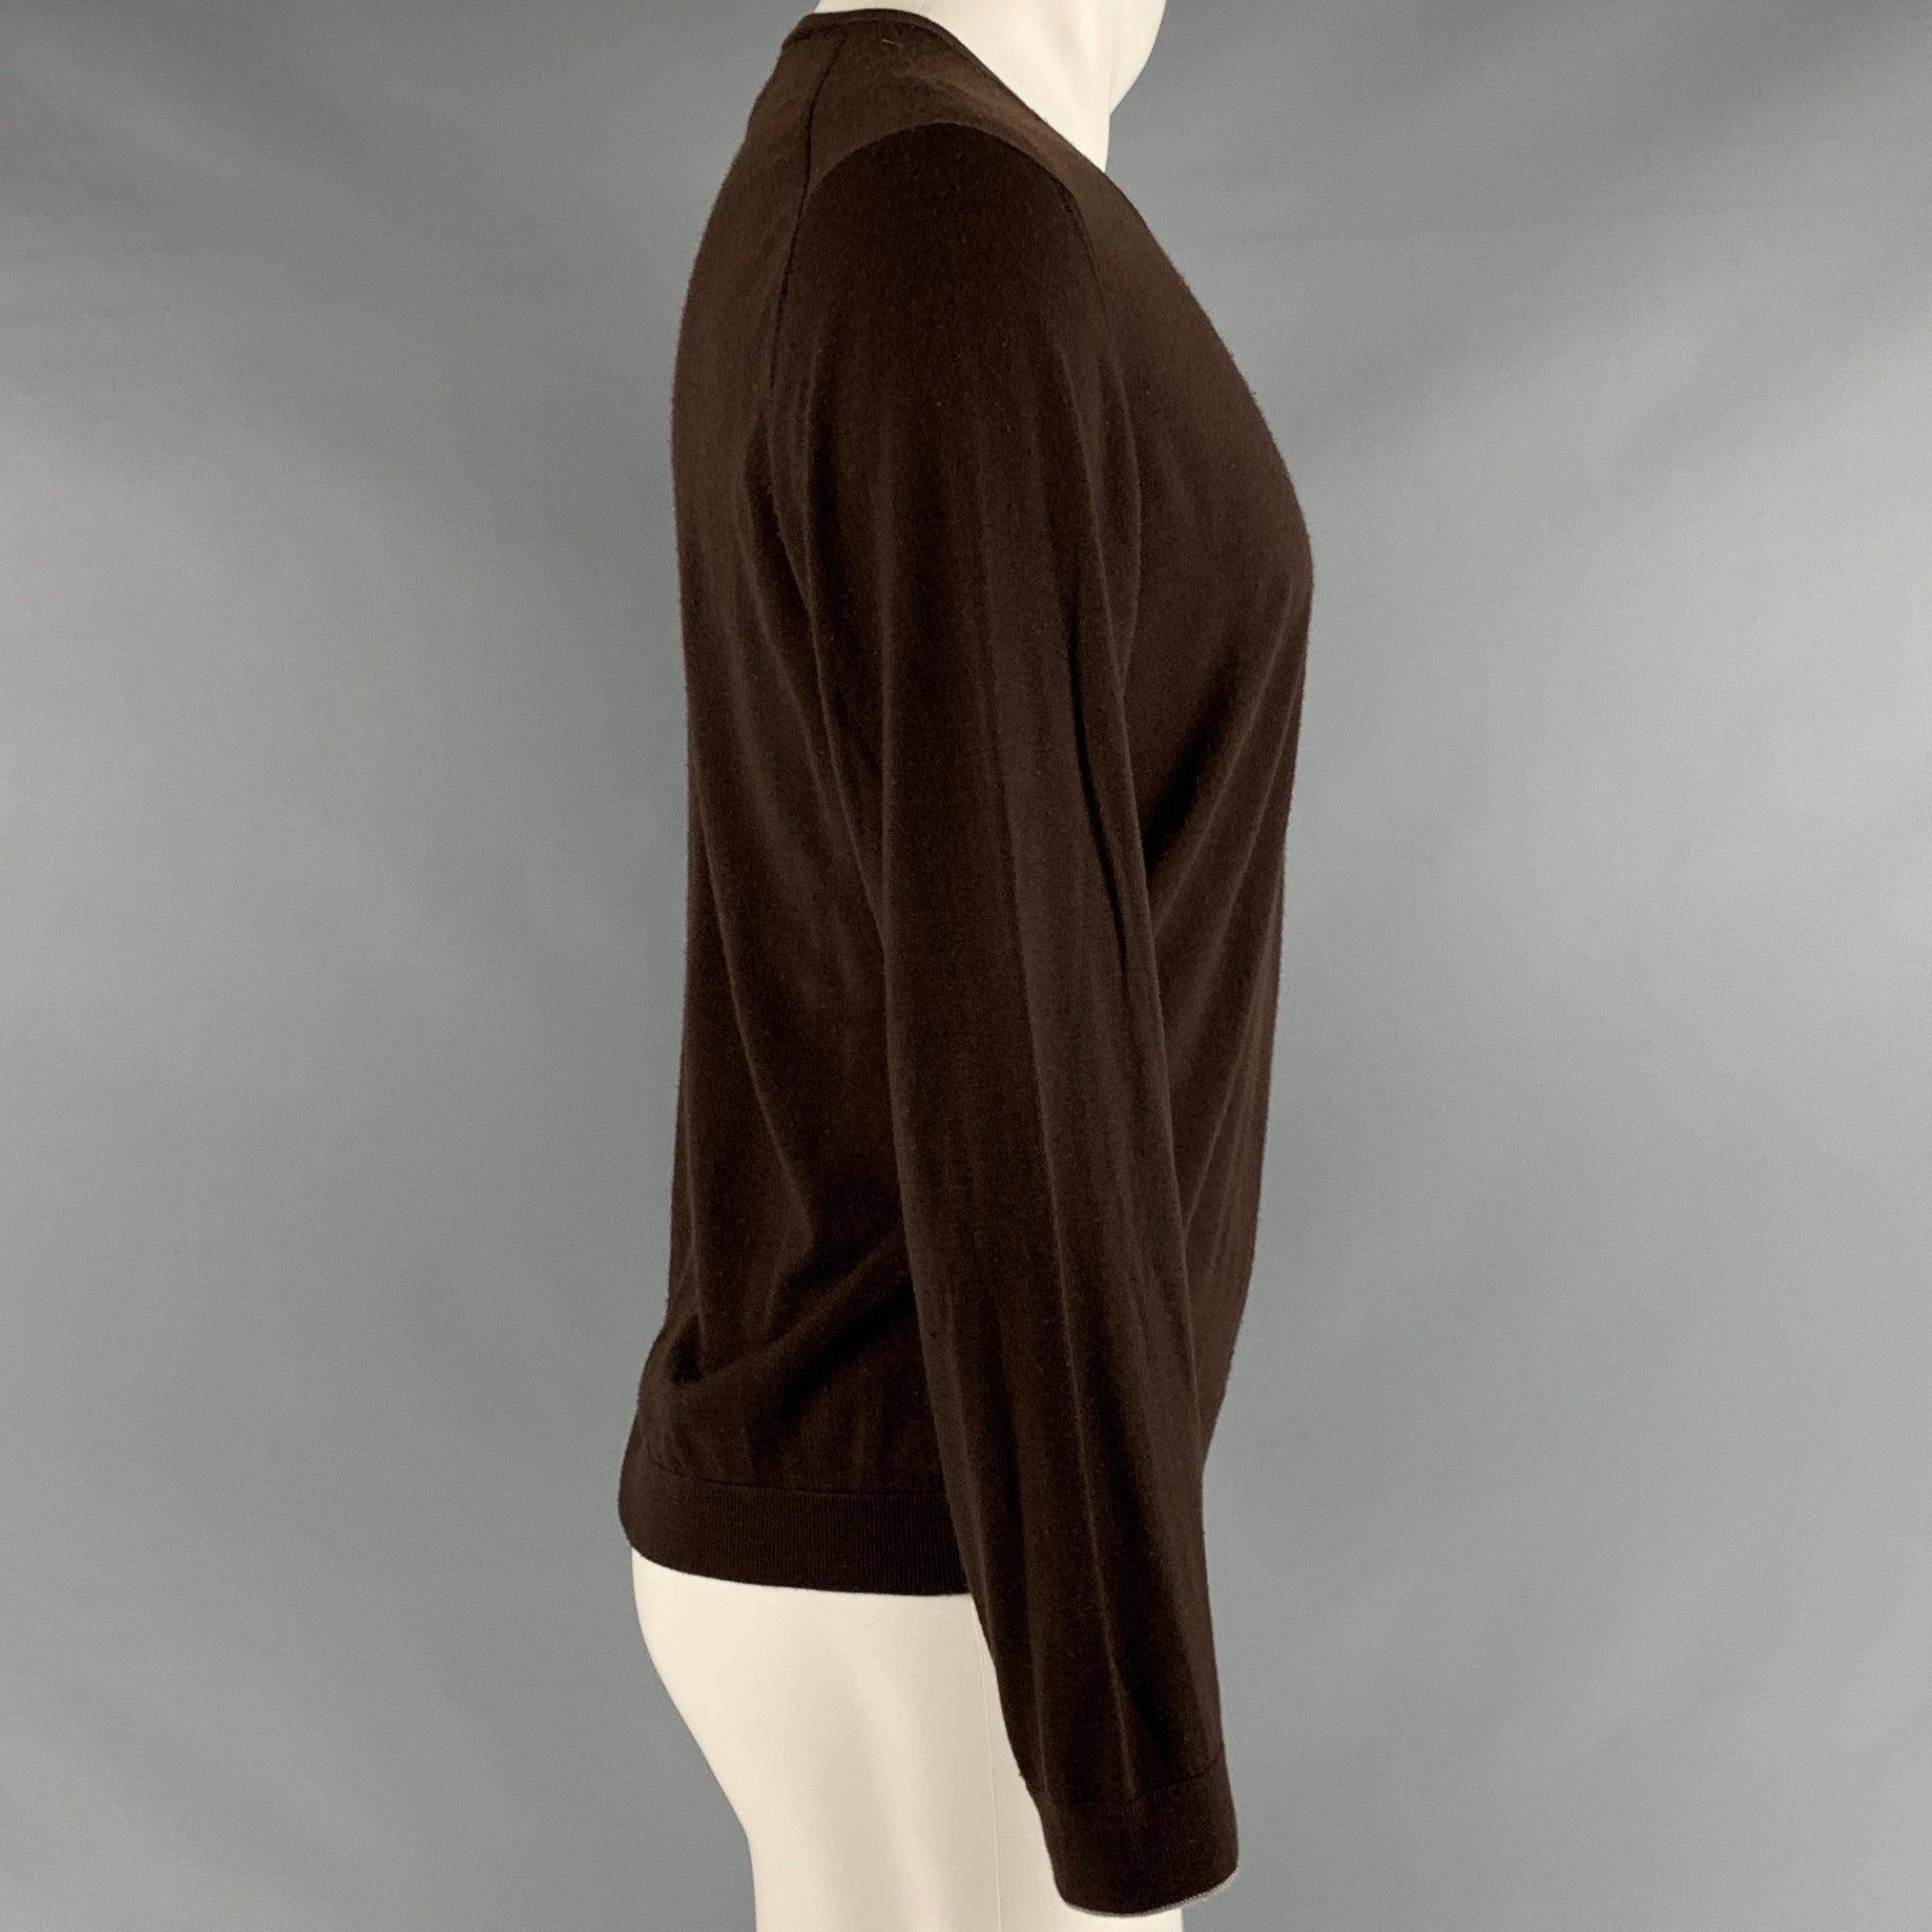 BRUNELLO CUCINELLI pullover
in a brown wool cashmere blend fabric featuring grey trim, and V-neck. Made in Italy.Good Pre-Owned Condition. Moderate signs of wear, as is. Please check photos. 

Marked:   46 

Measurements: 
 
Shoulder: 17.5 inches